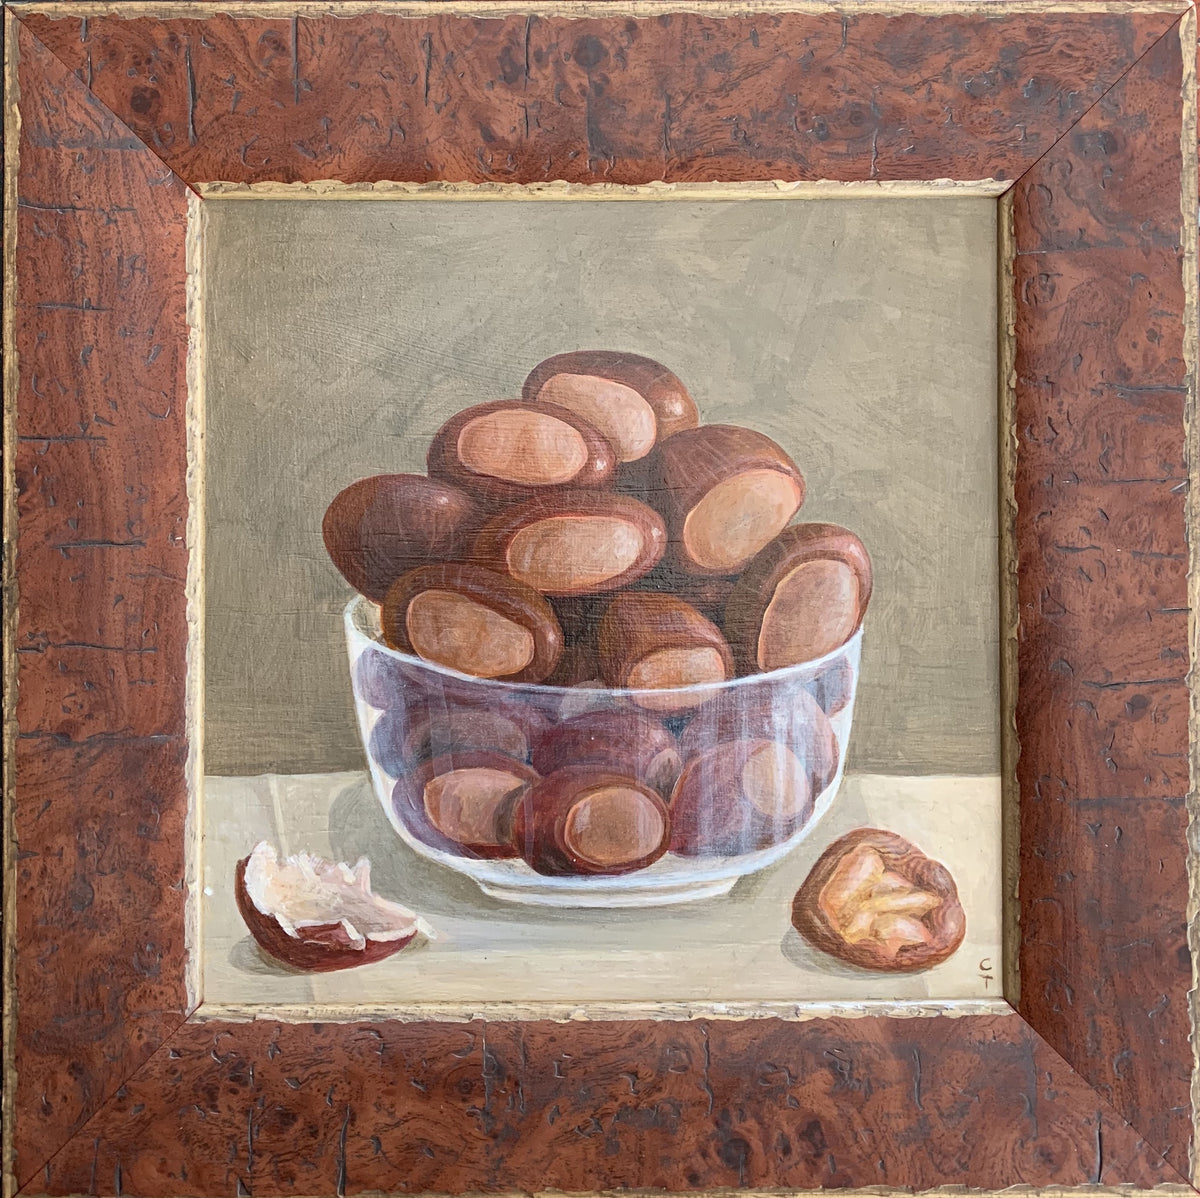 Chestnuts in a Glass Bowl